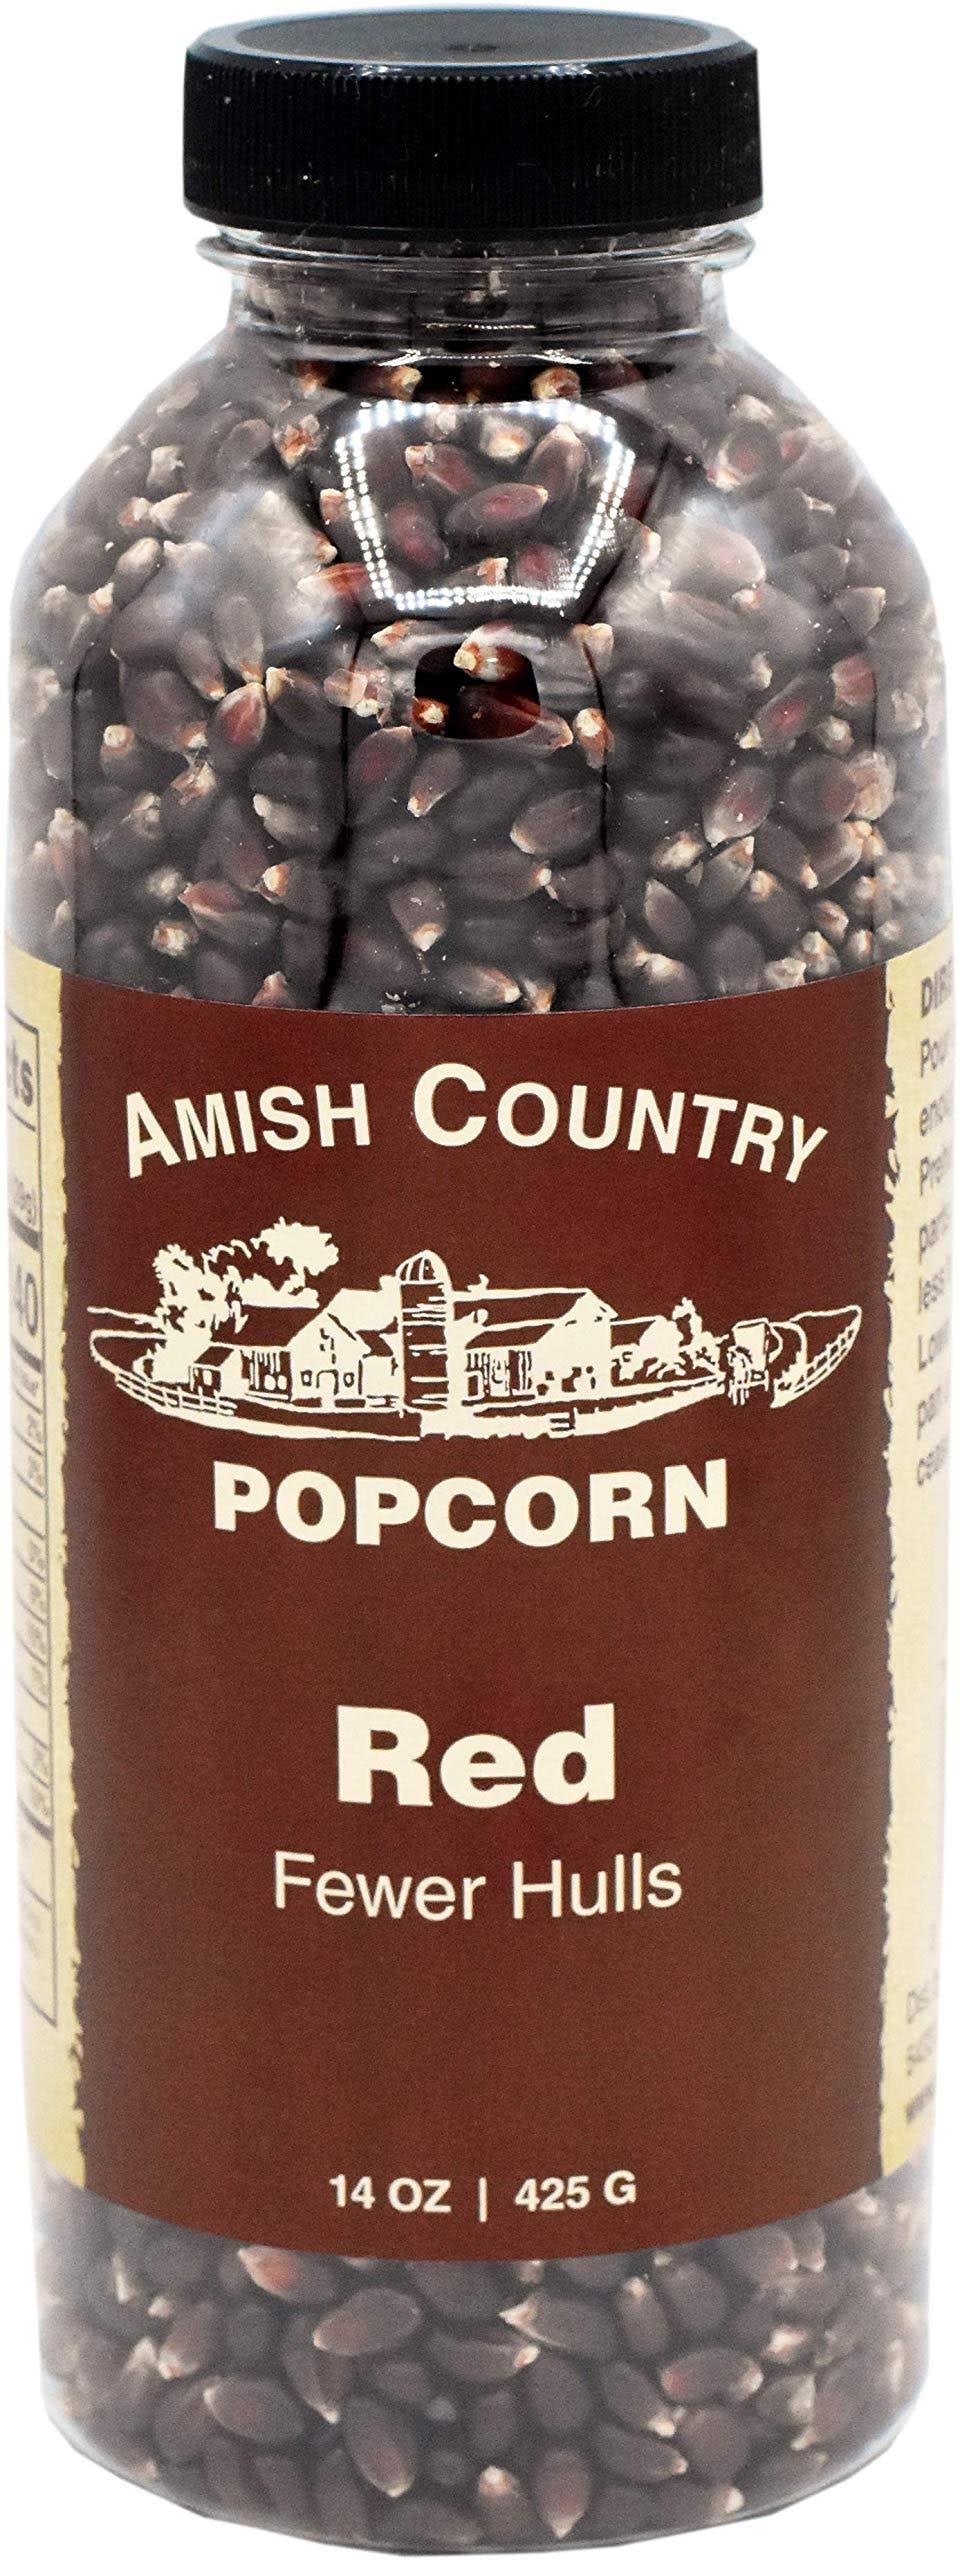 Amish Country Red Popcorn Bottle, 14 oz